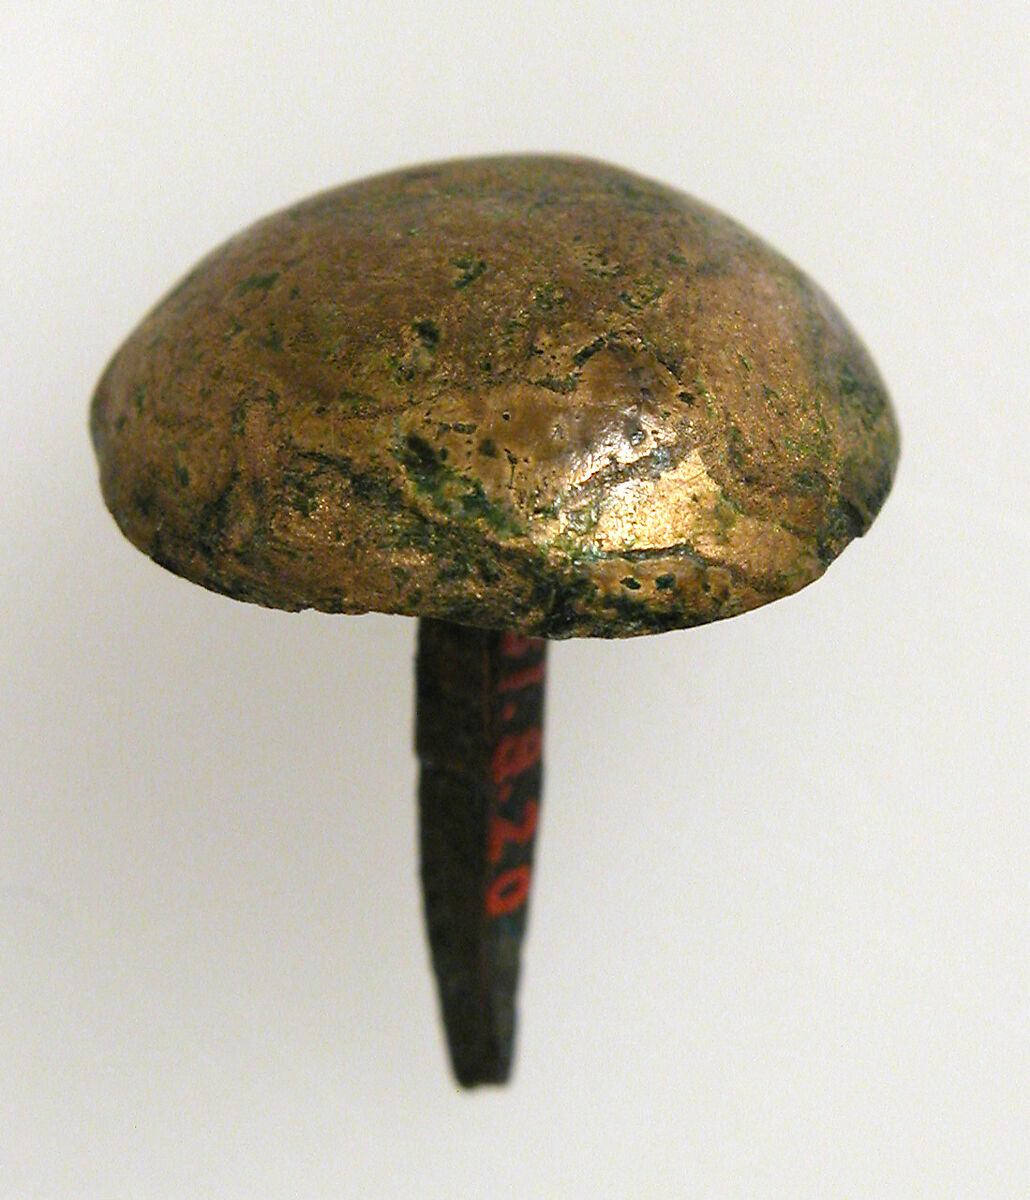 Nail, Copper alloy with gilded head, Coptic 